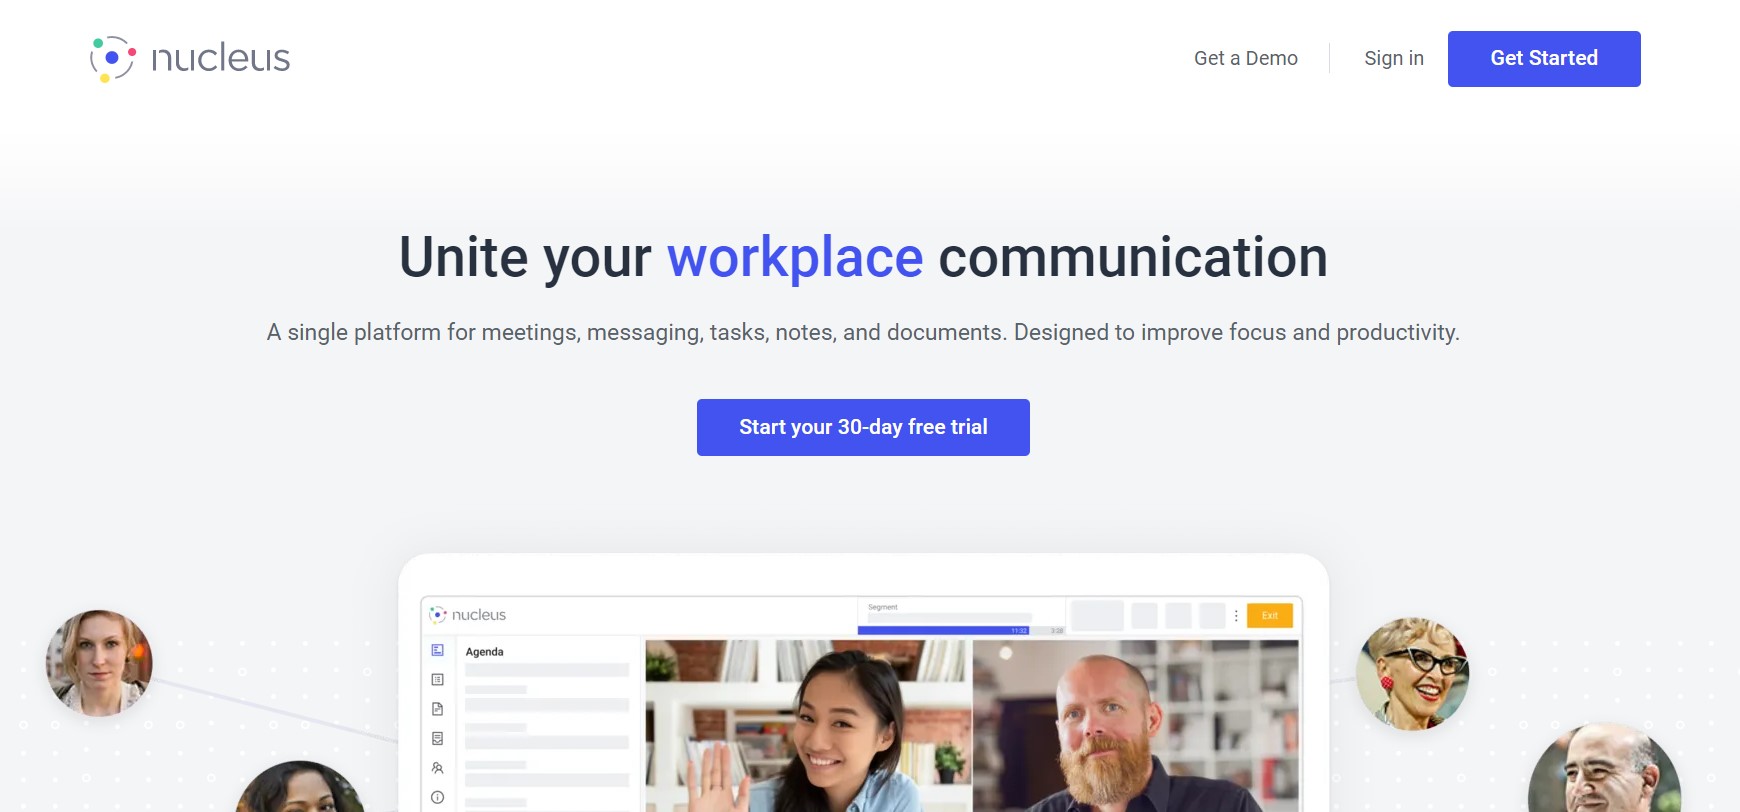 Get feedback from a vast remote working audience about nucleus